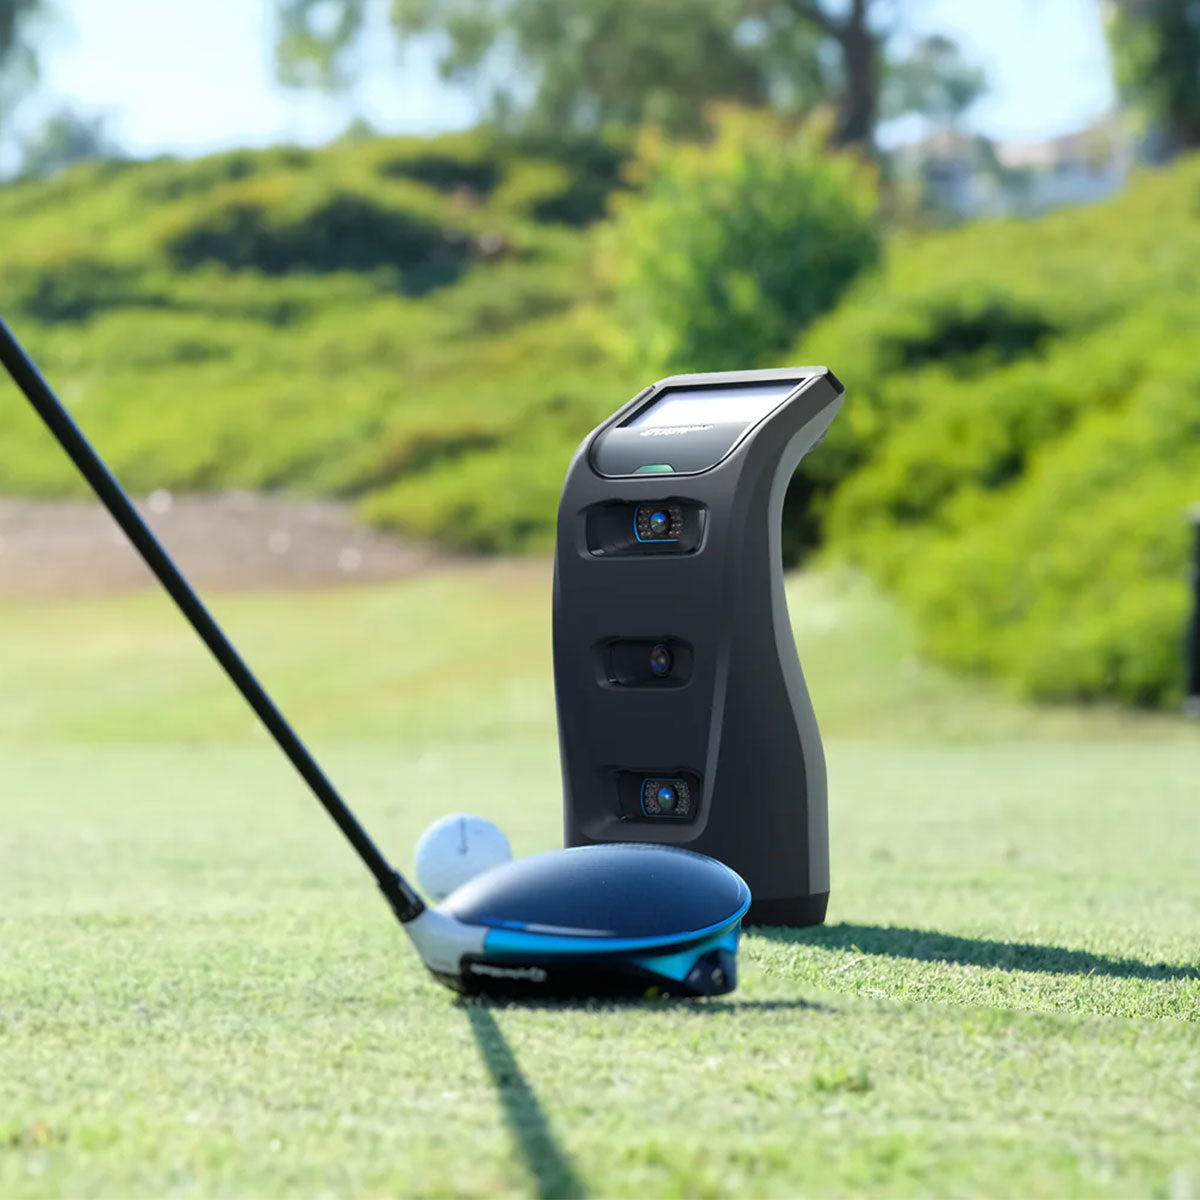 The Foresight Sports GC3 golf launch monitor on the golf course with a golf ball and golf driver head in front of it